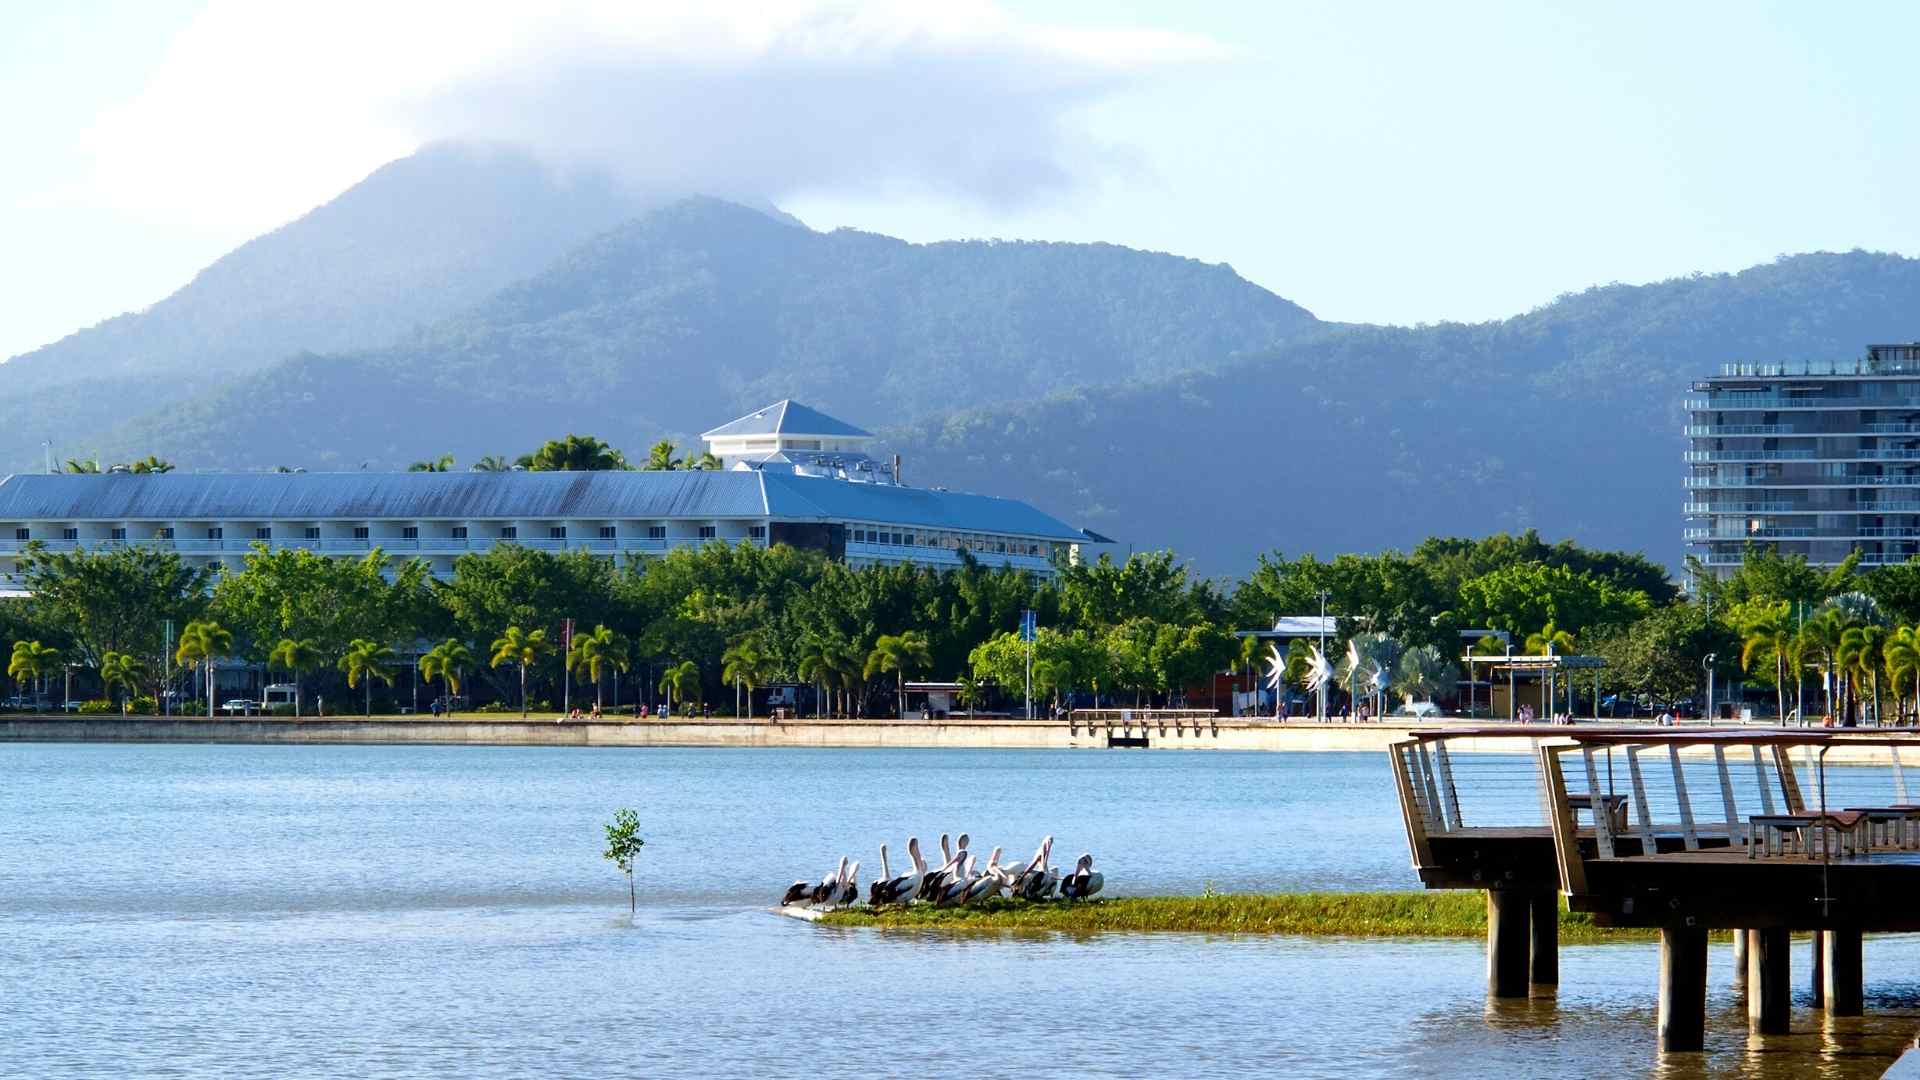 Cairns 4 day Itinerary Day 1 - Explore the city, Aquarium, Hemingway’s Brewery, Esplanade Day 2 - Great Barrier Reef Tour Day 3 - Explore water falls Day 4 - Kuranda Scenic Train and Tour